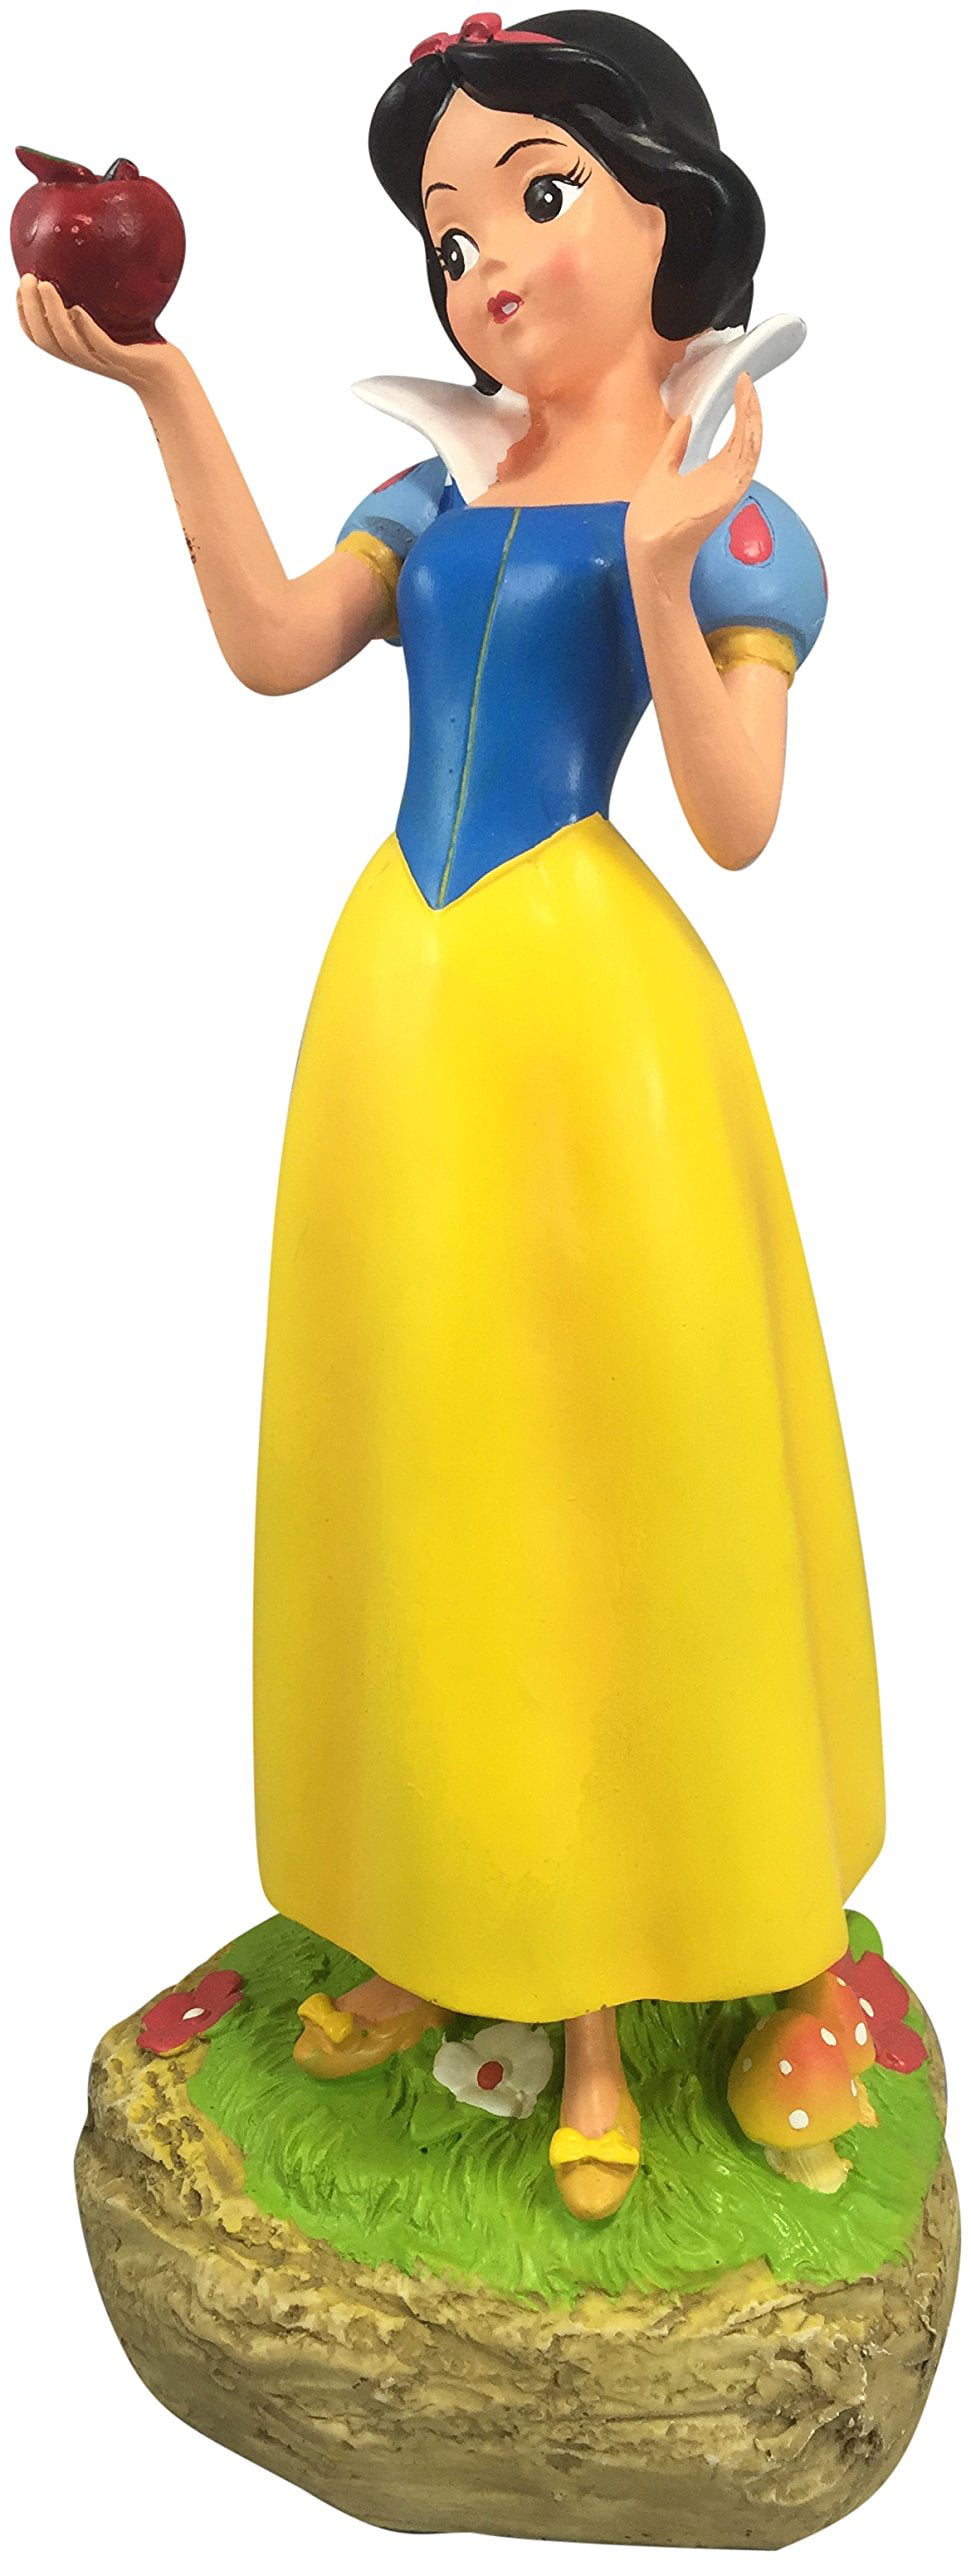 Disney Snow White Garden Statue Figurine Princess 8" Tall Resin With Apple for sale online 